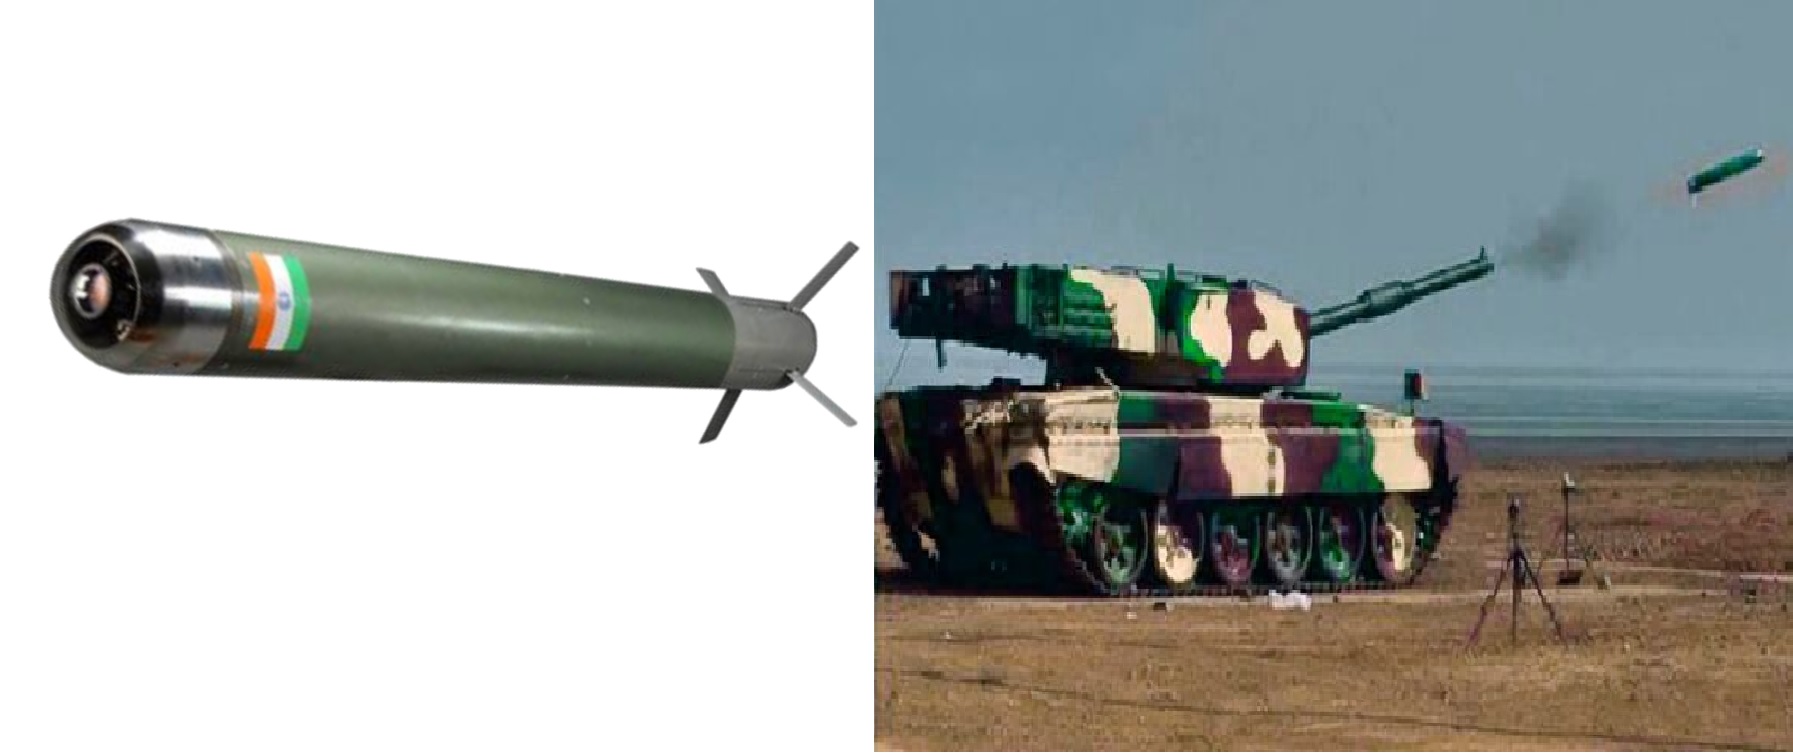 India's SAMHO Cannon Launched Missile Ready for Production, Revolutionizing Anti-Tank Warfare